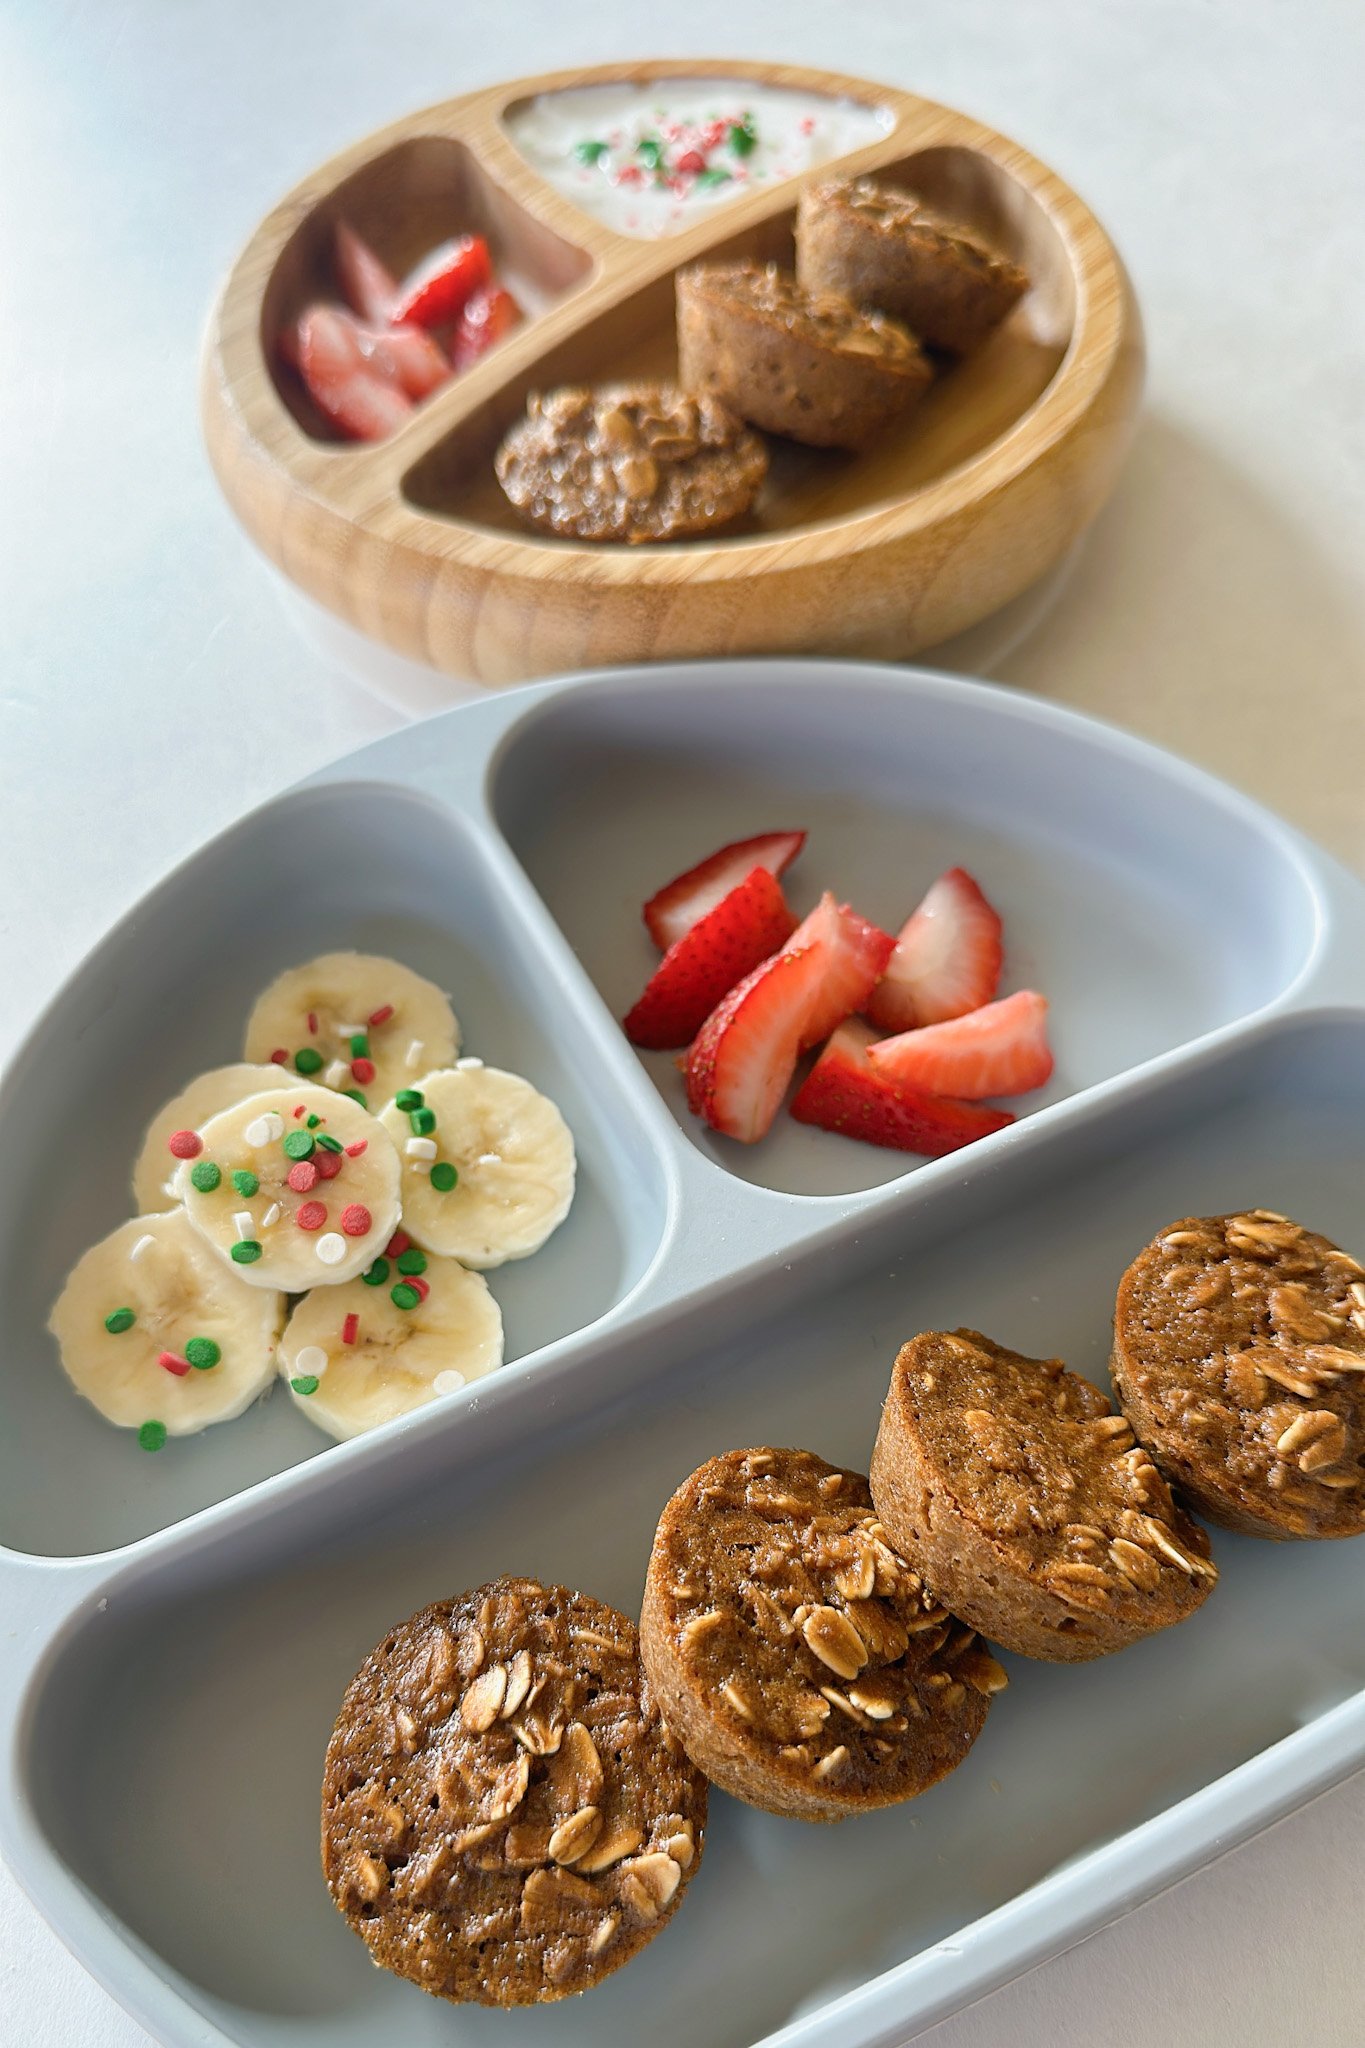 Gingerbread baked oatmeal bites served with strawberries, yogurt, and bananas.